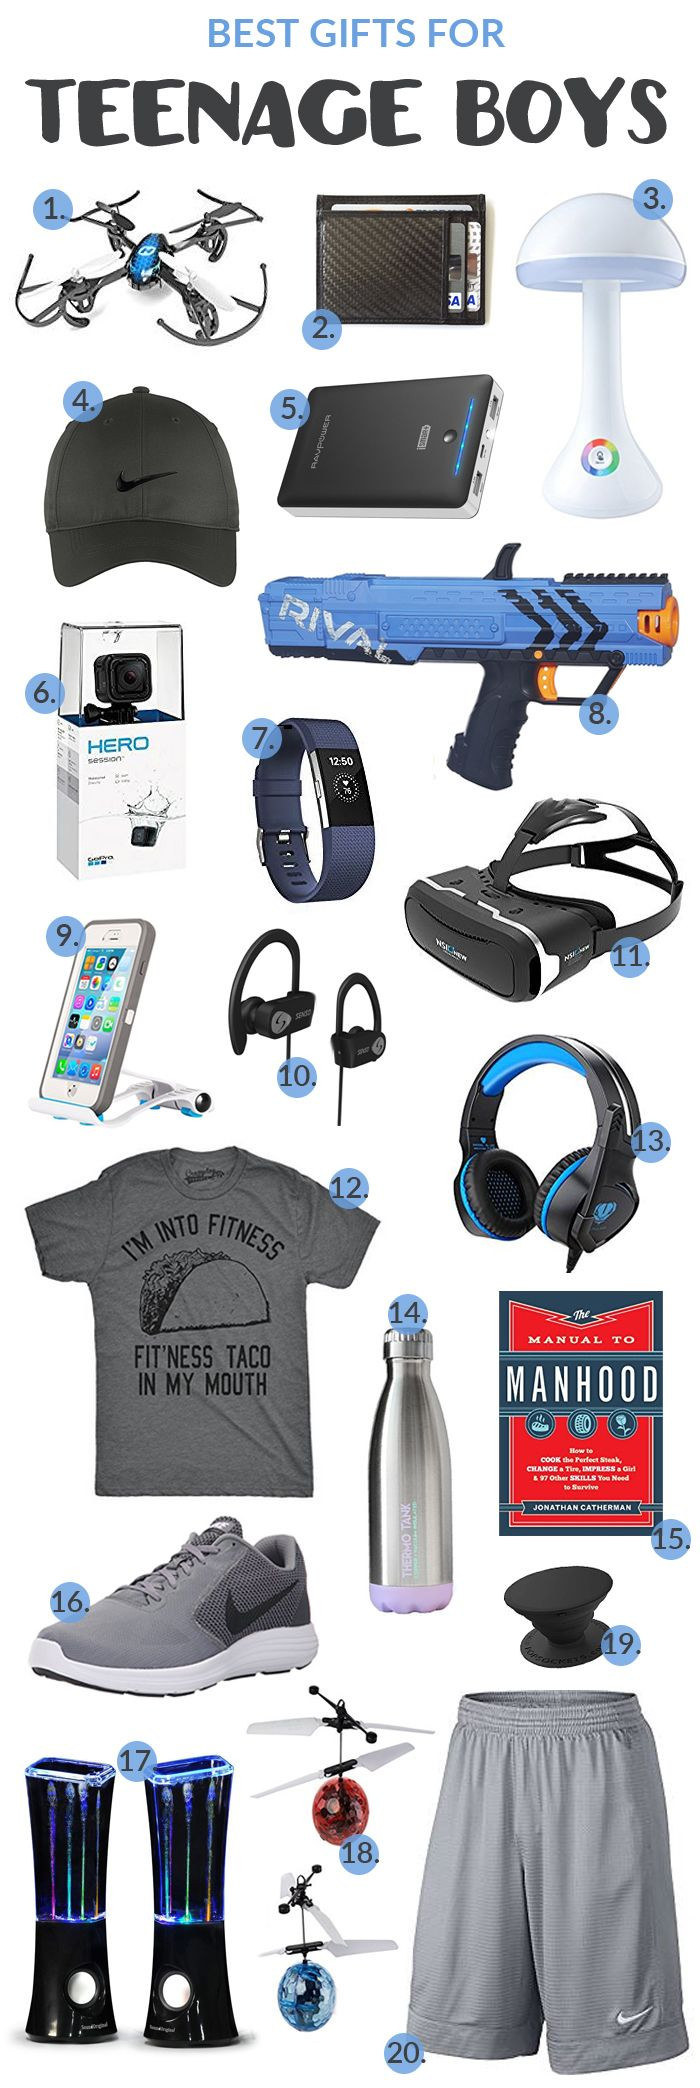 Christmas Gift Ideas For Teenage Boys
 Pin on Our Kind of Crazy Best of Board